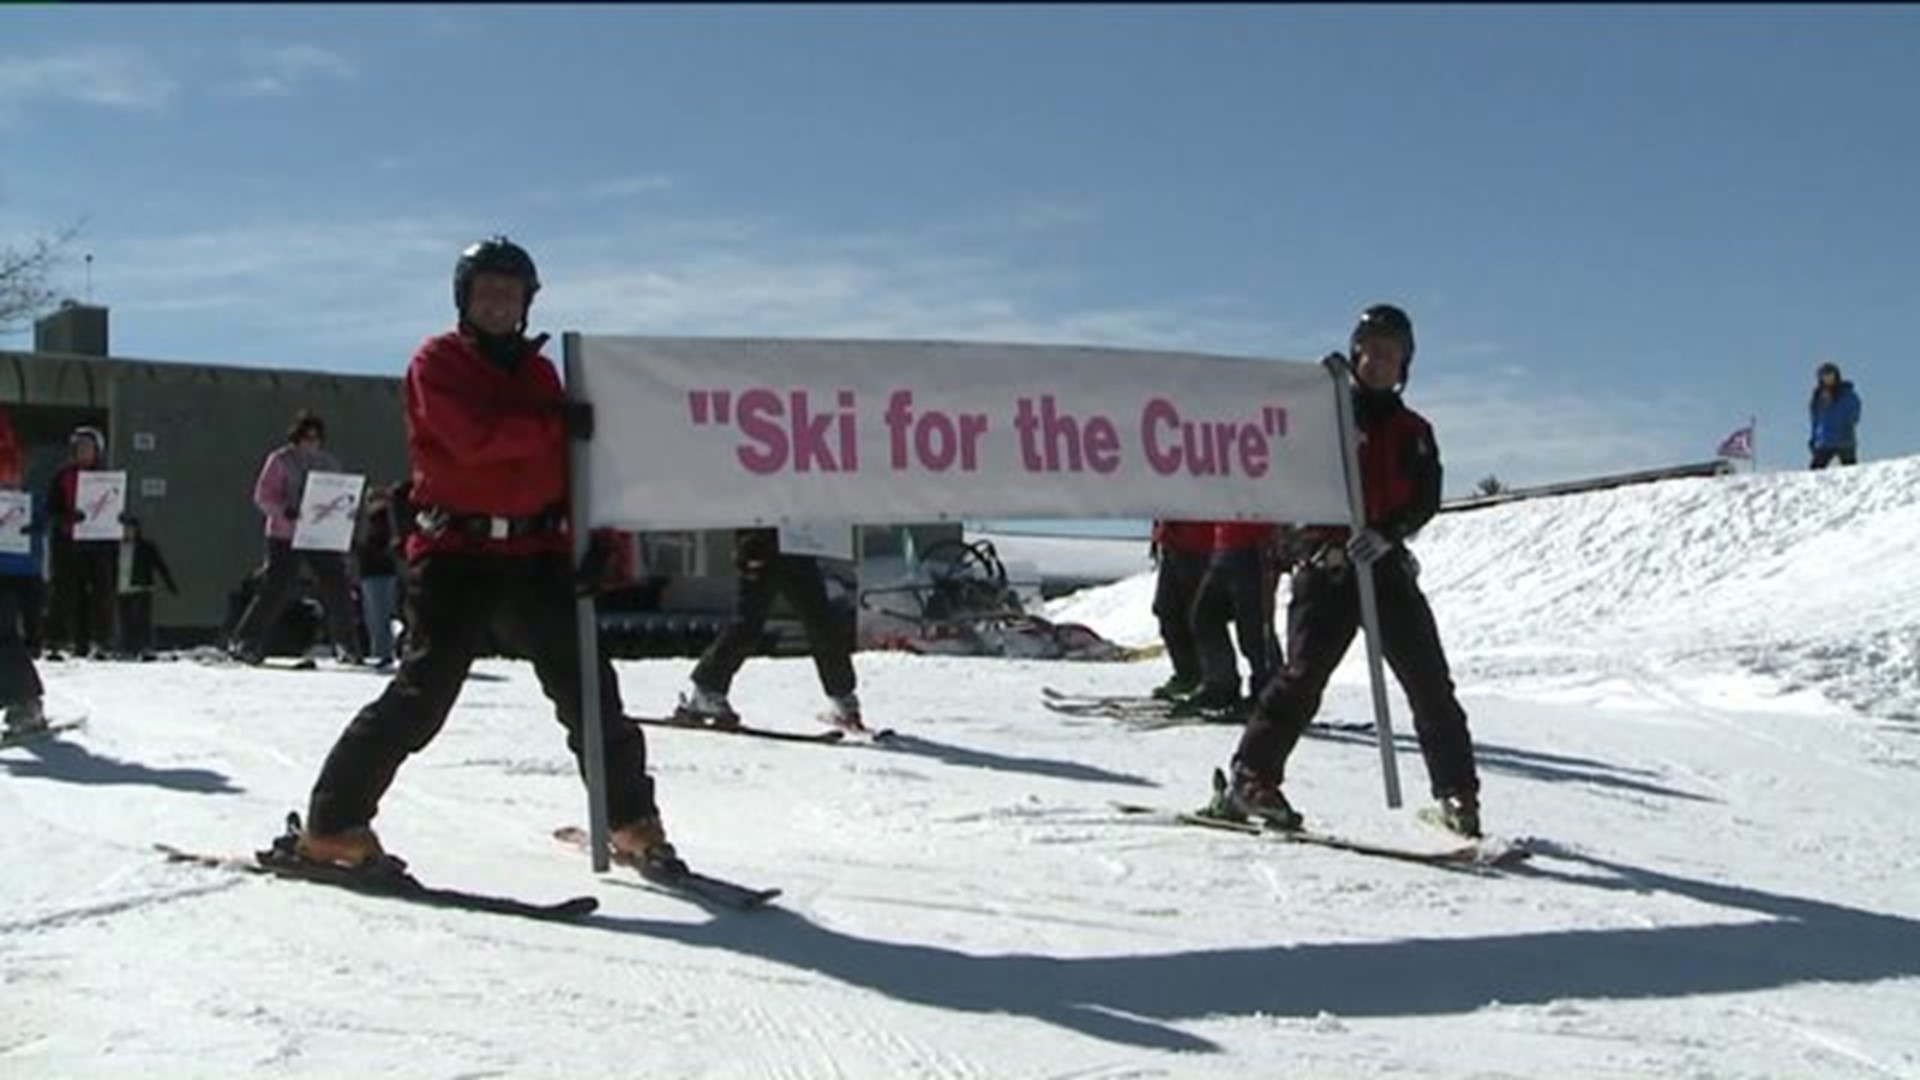 A Mission on the Mountain: Ski for the Cure